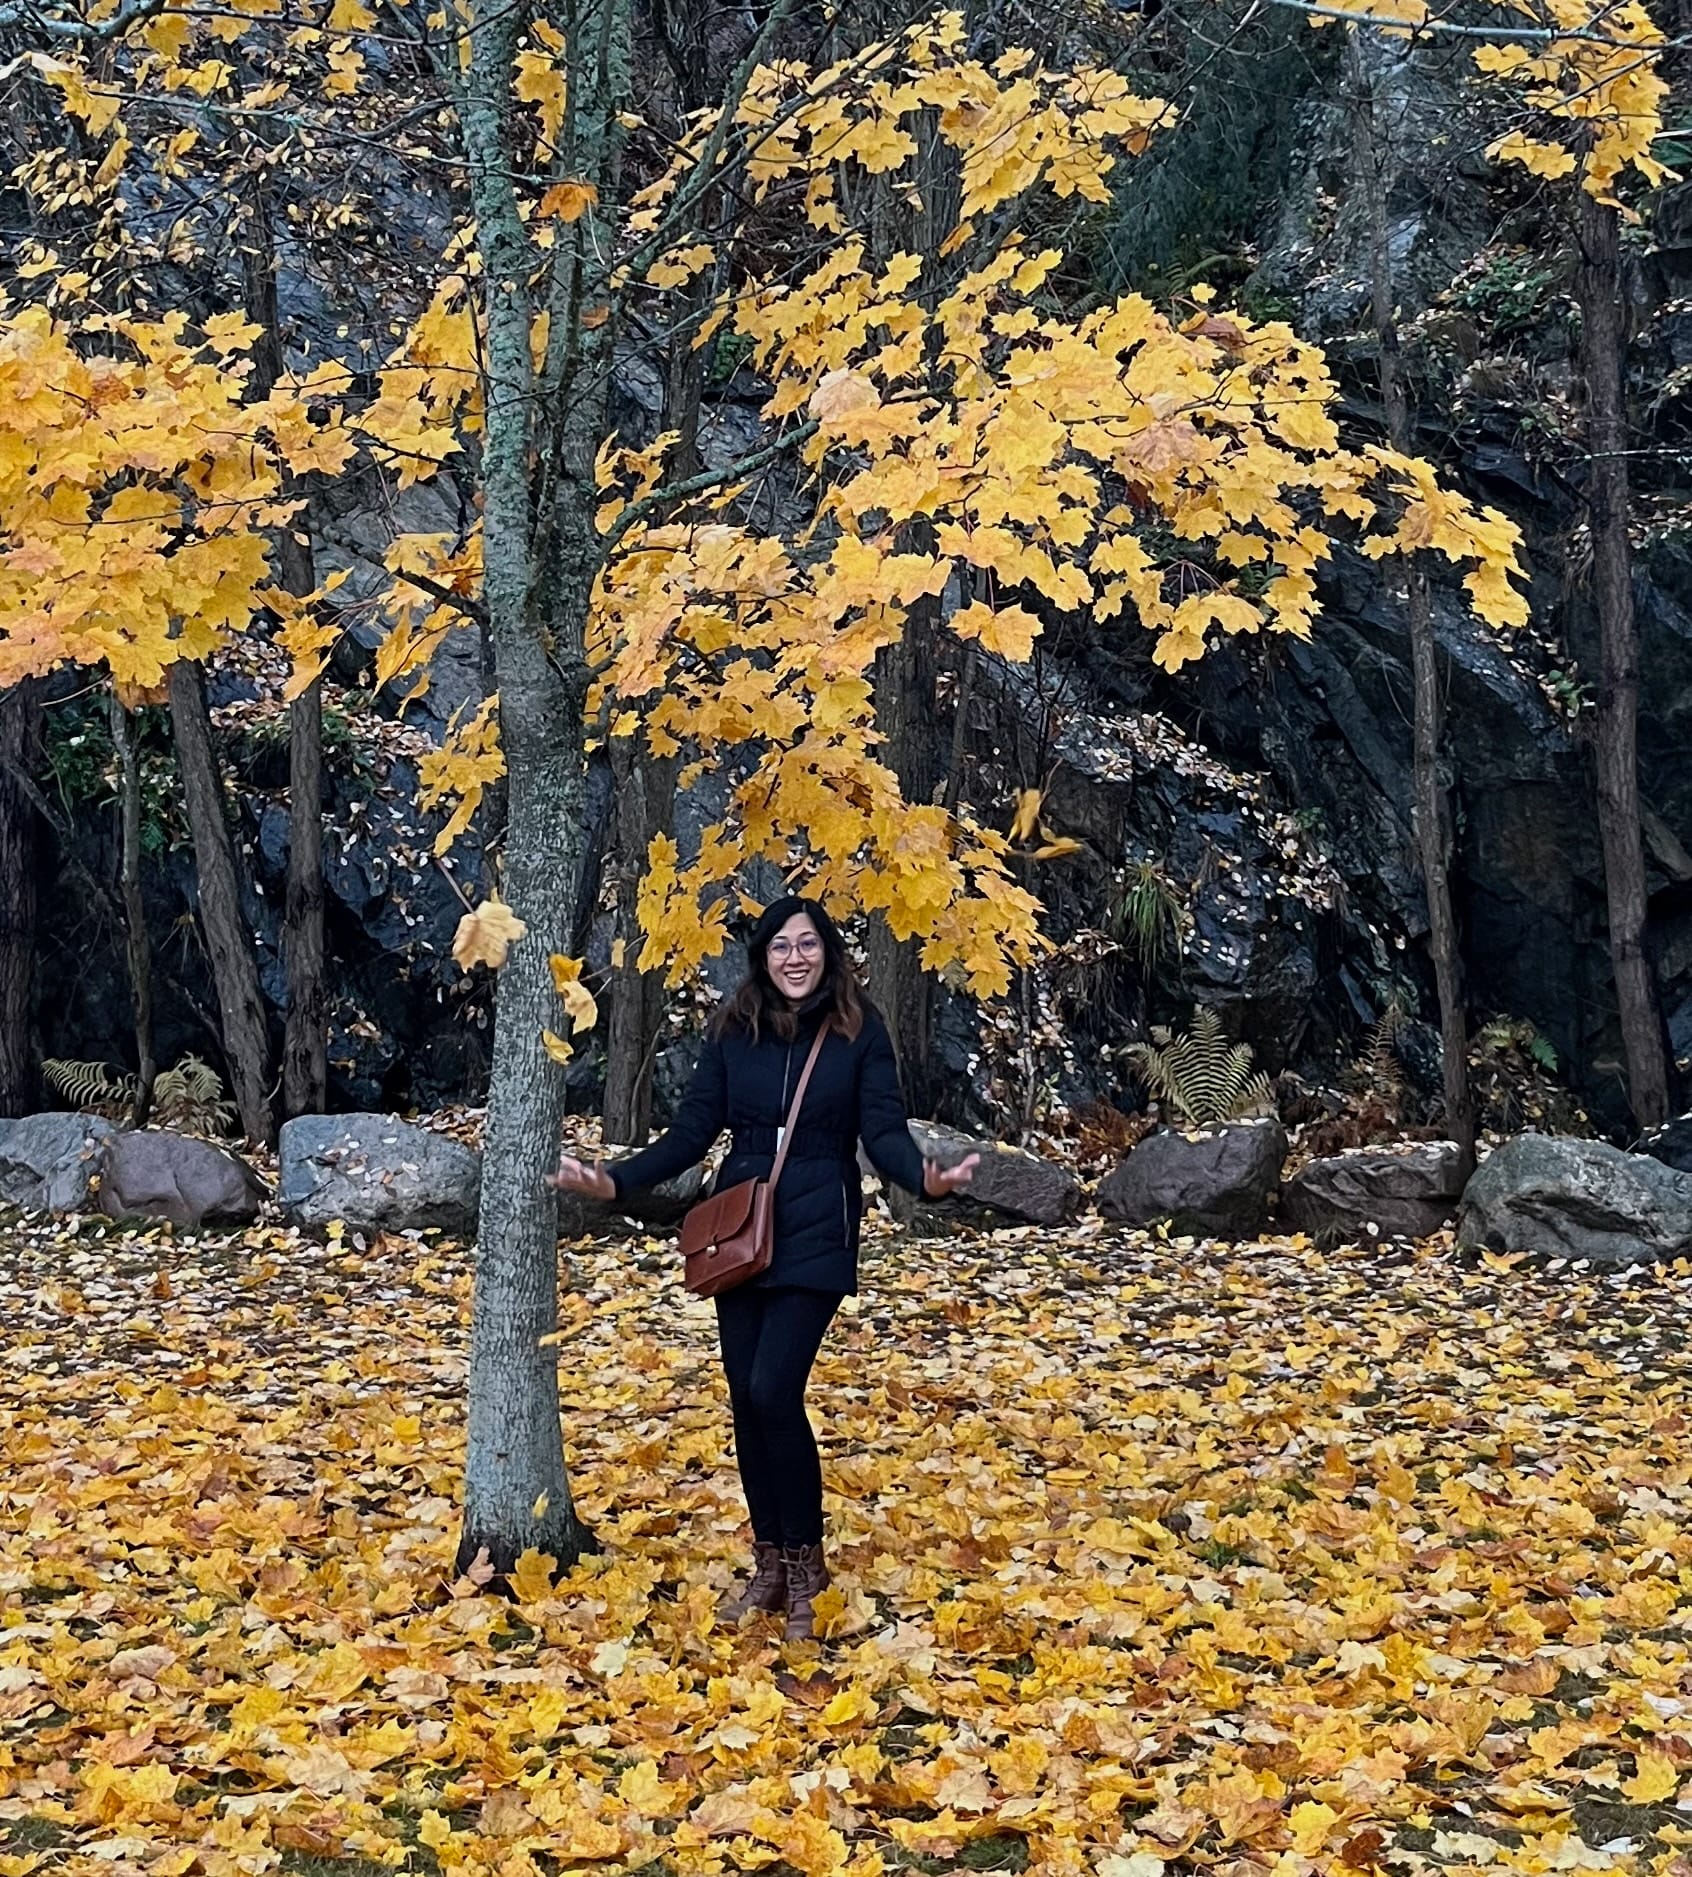 Me playing with autumn leaves in Nacka, Stockholm